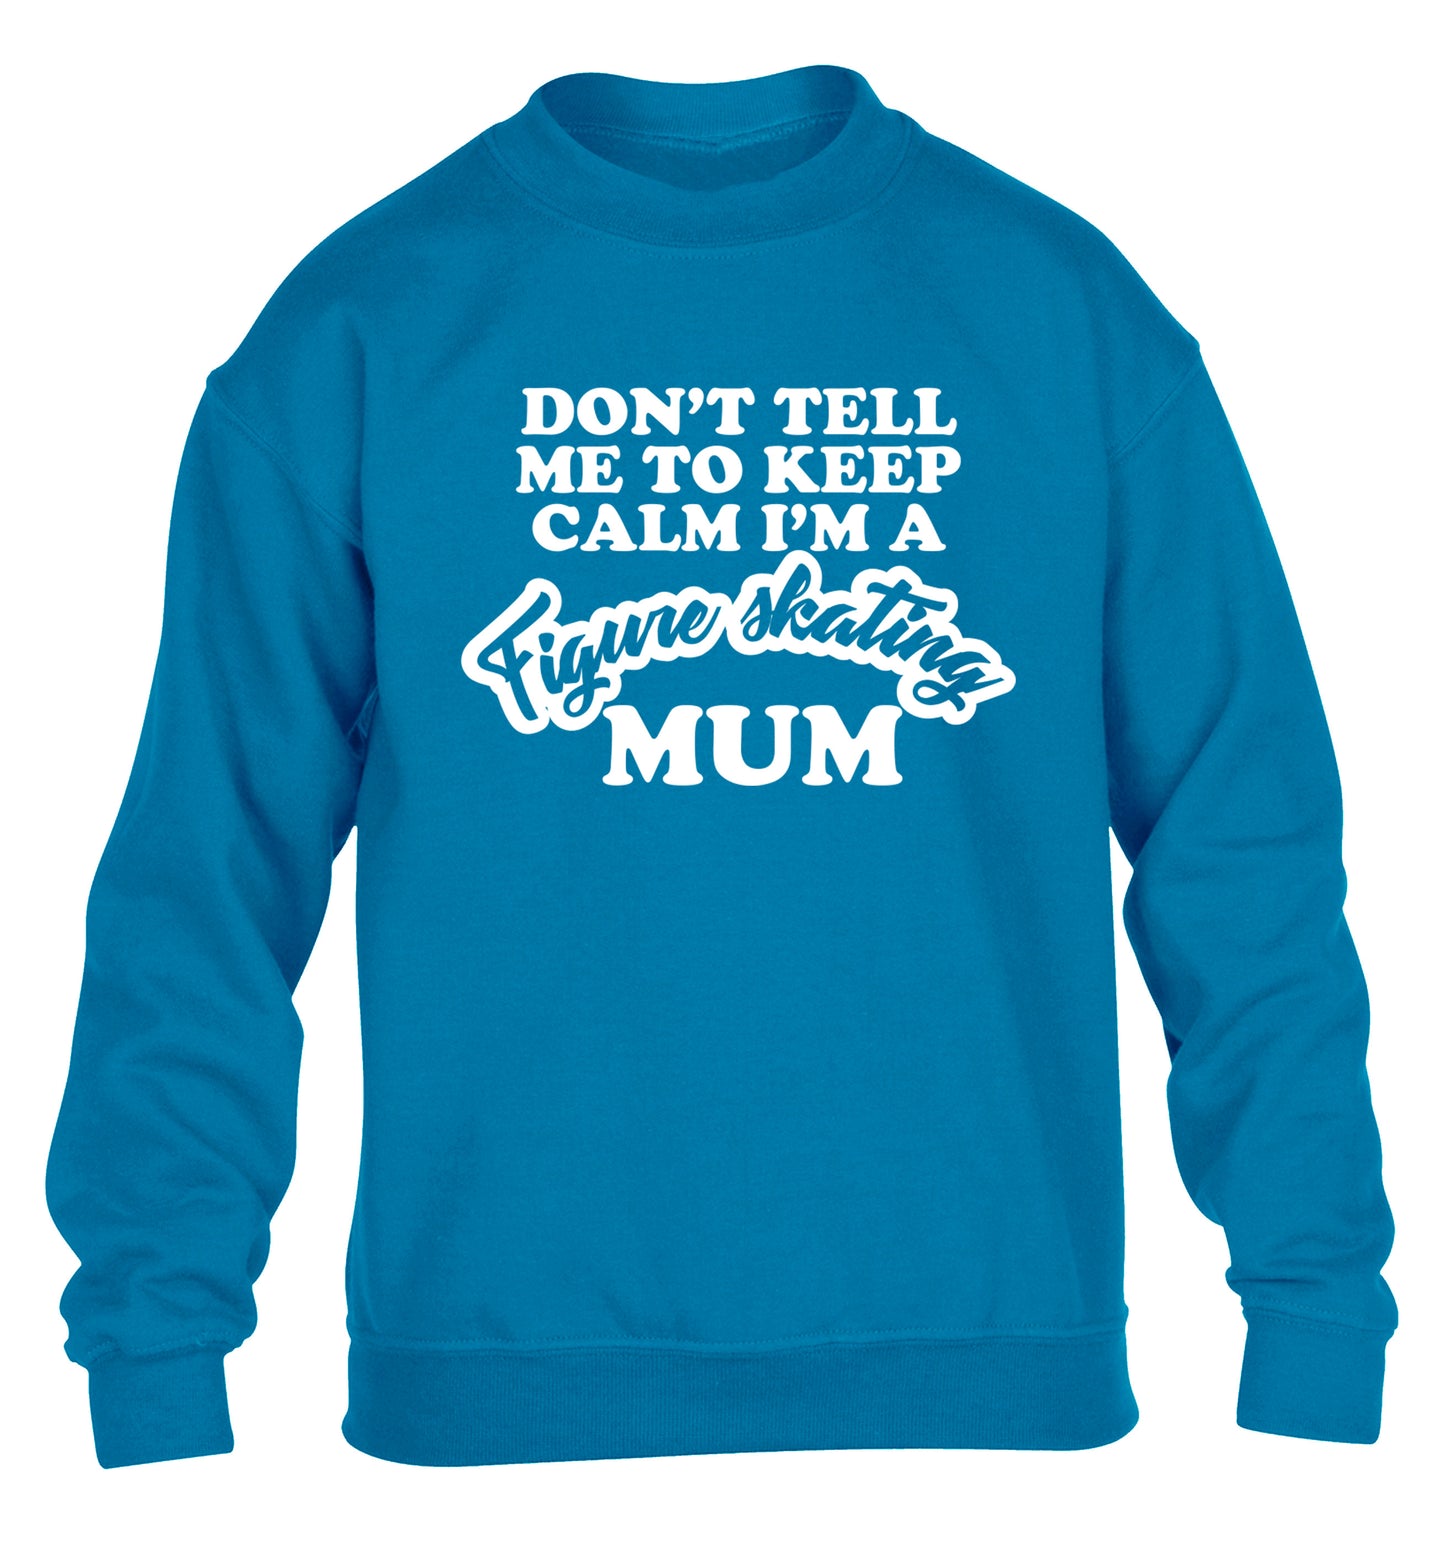 Don't tell me to keep calm I'm a figure skating mum children's blue sweater 12-14 Years